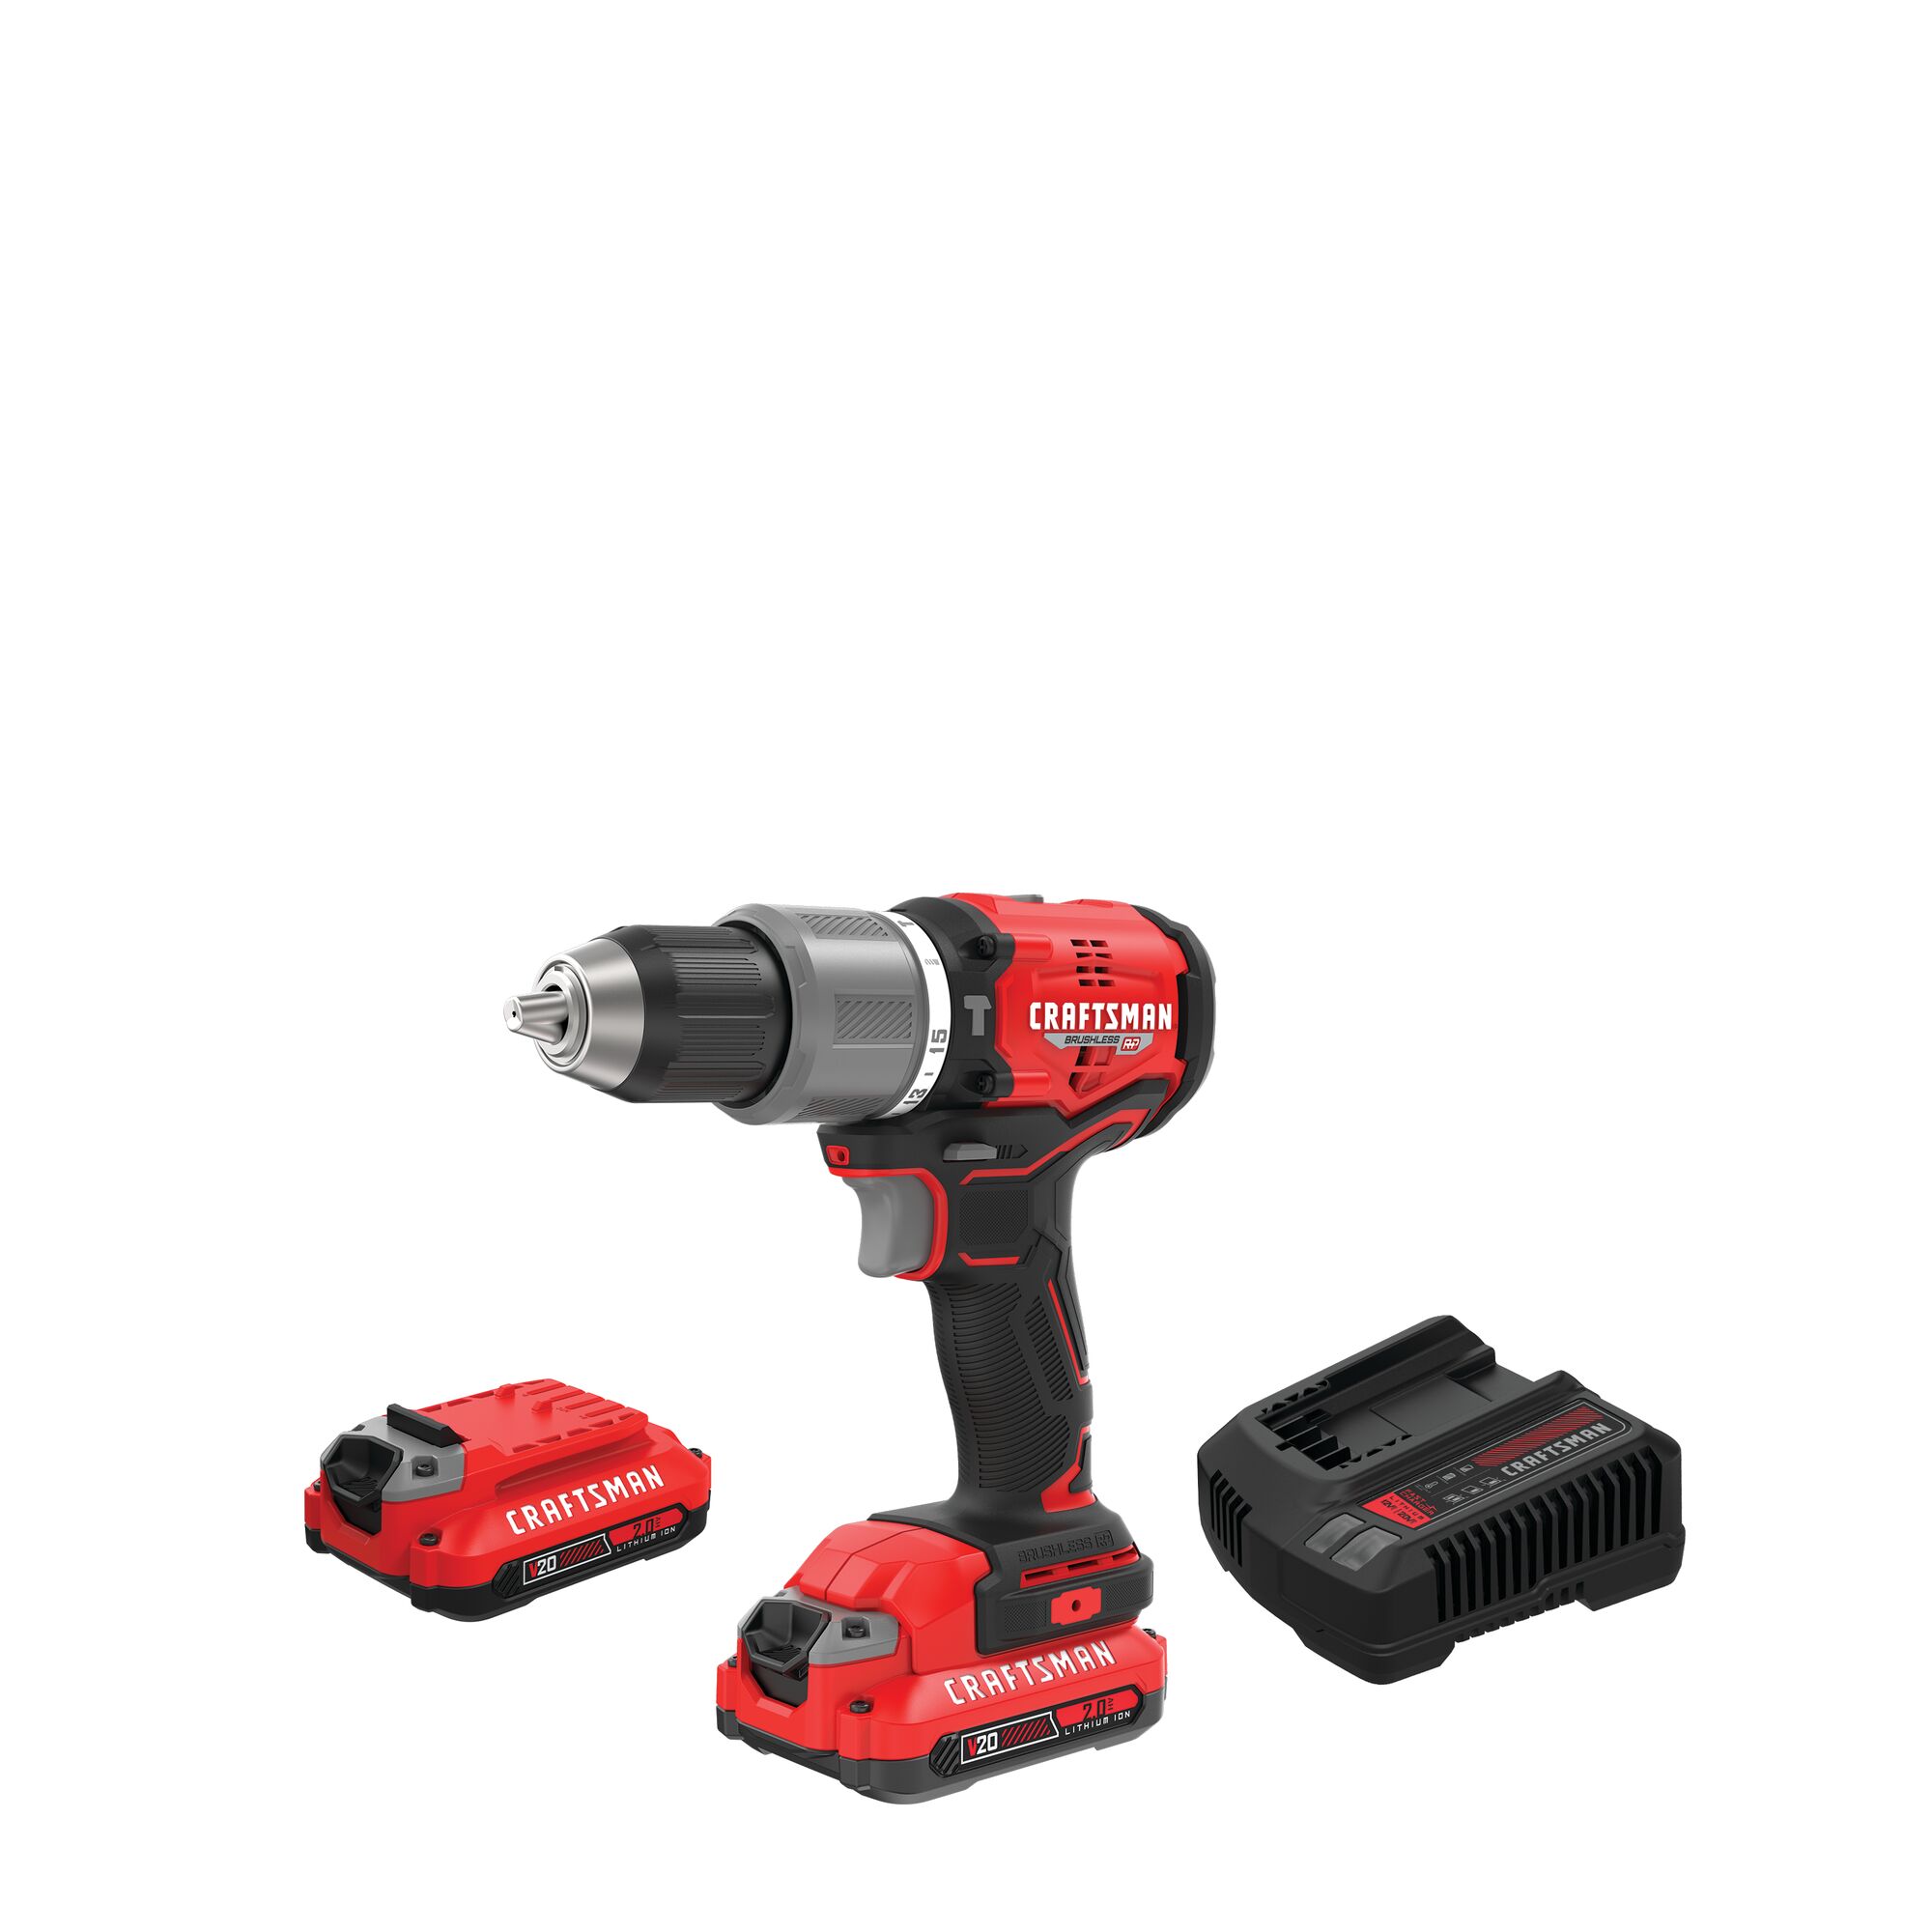 Hammer drill kit with two batteries on white background